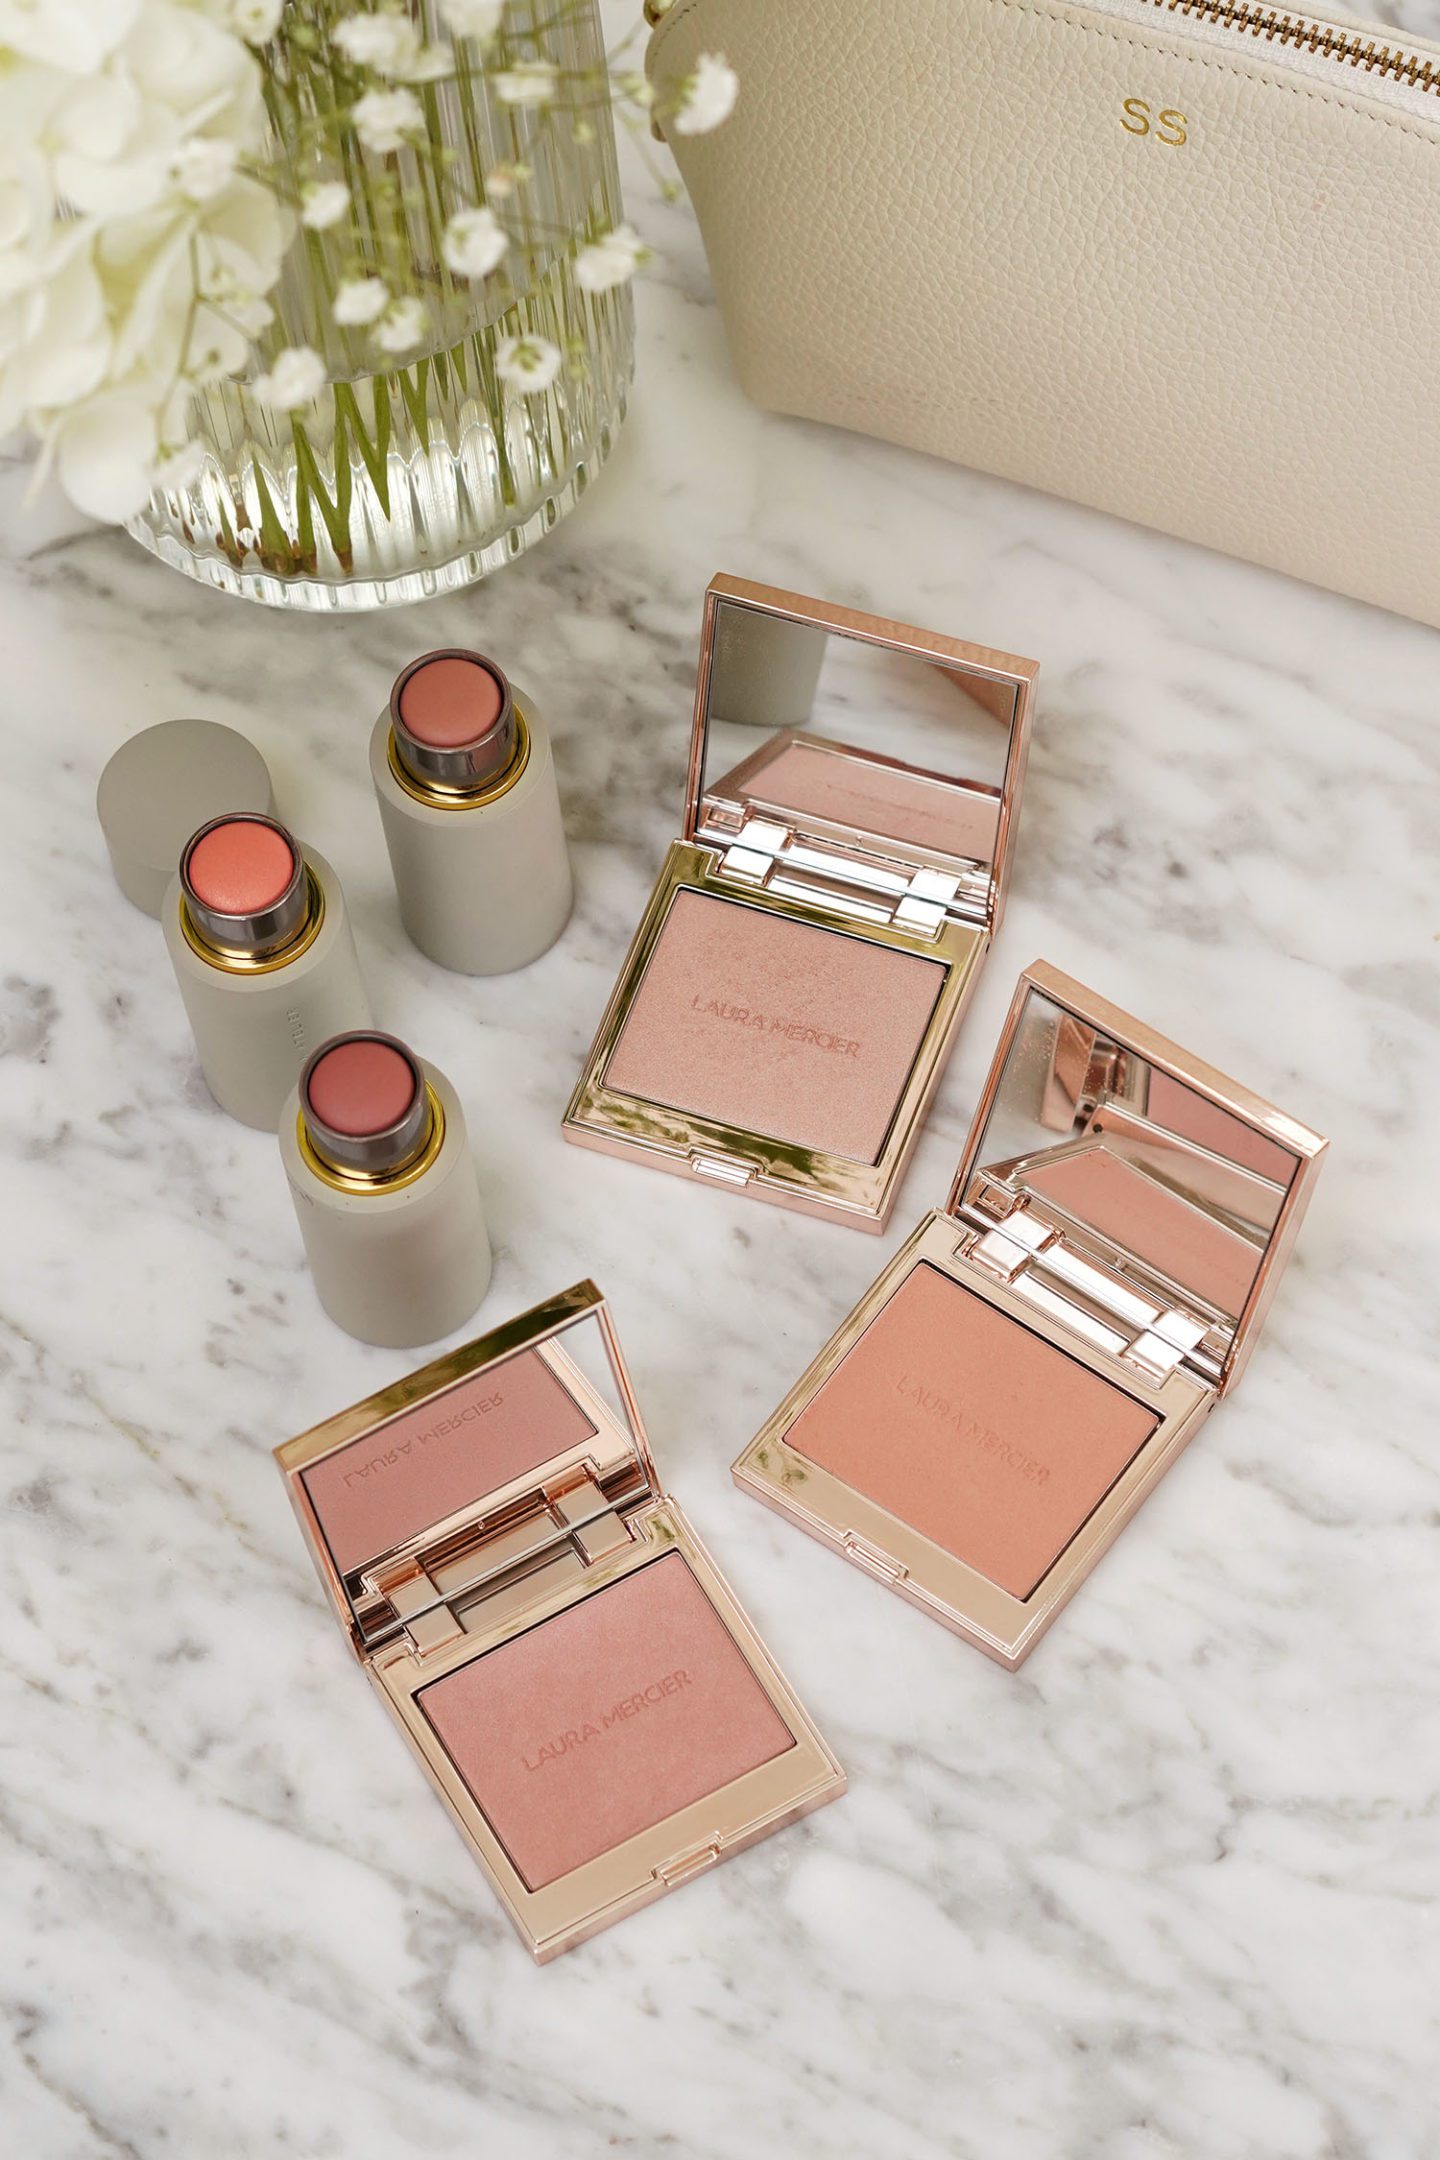 Laura Mercier Rose Glow Blush Color Infusion and Westman Atelier Baby Cheeks